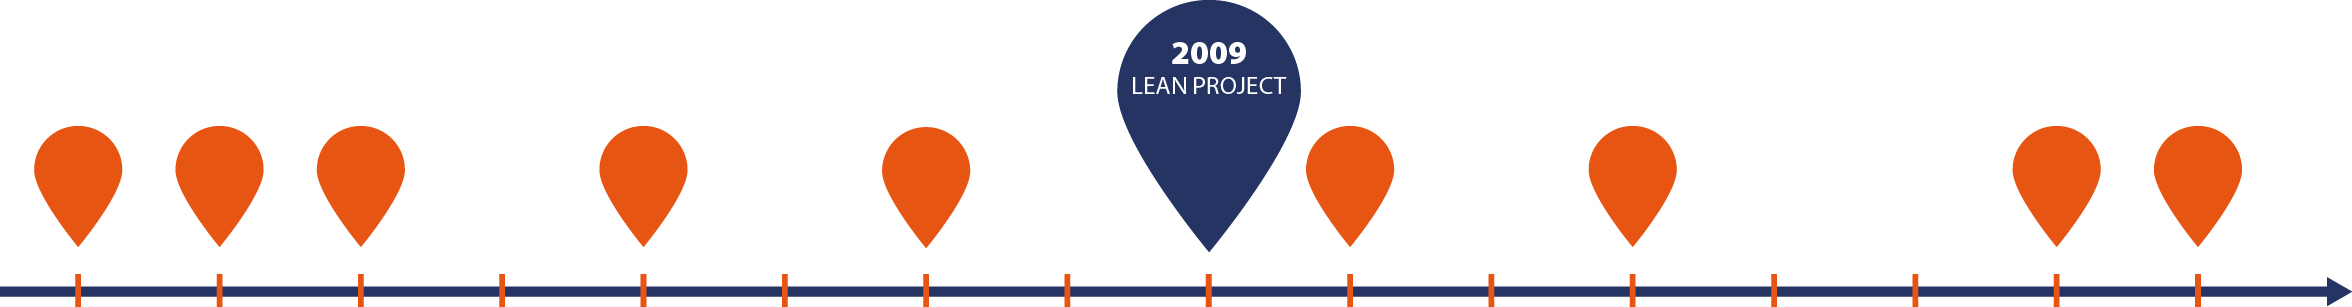 Lean project